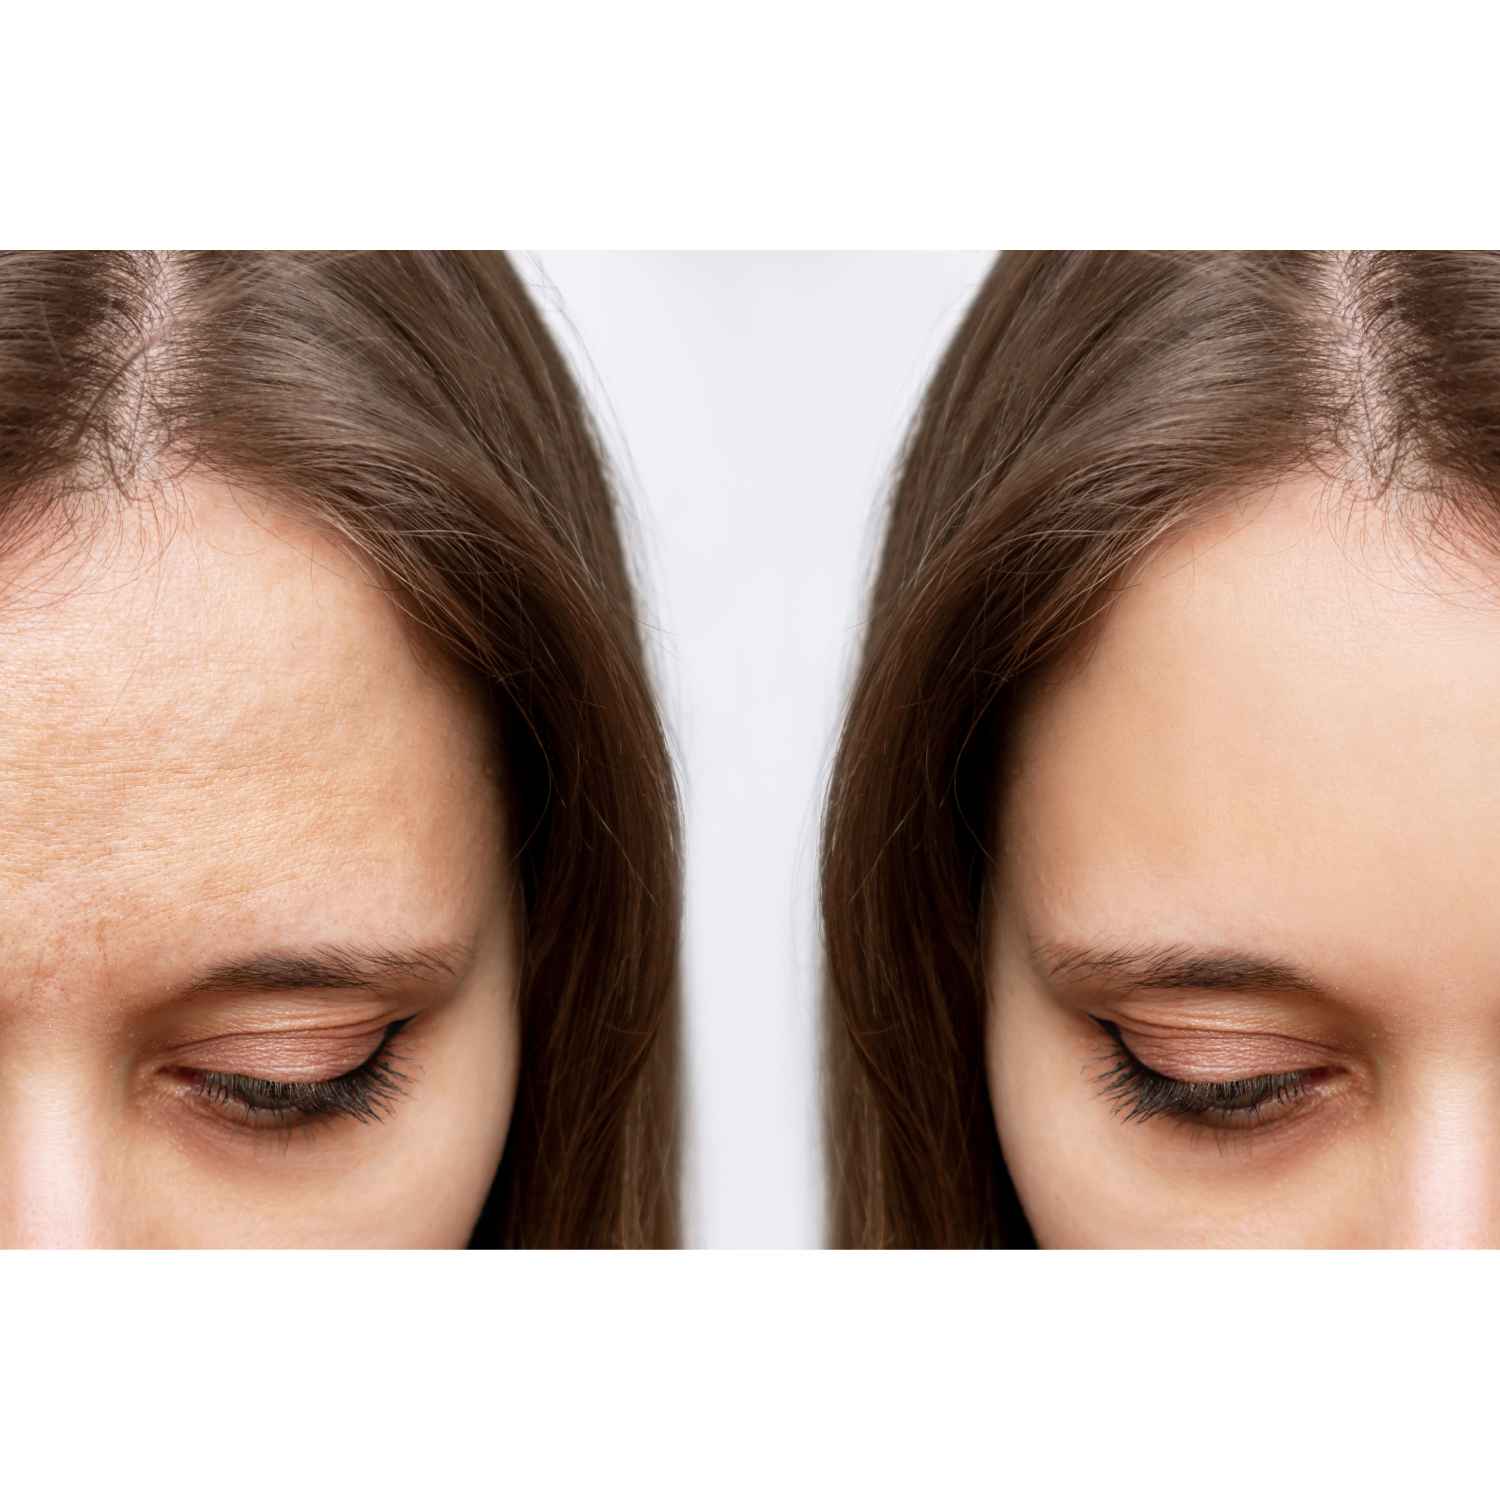 Wrinkle Relaxer Treatment Before and After Flawless Skin MedSpa Newyork